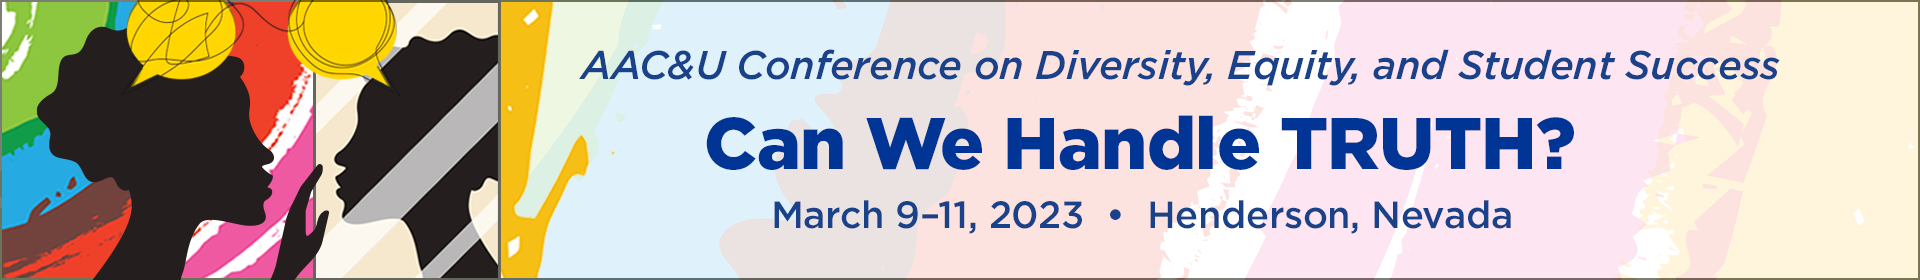 AAC&U 2023 Conference on Diversity, Equity, and Student Success